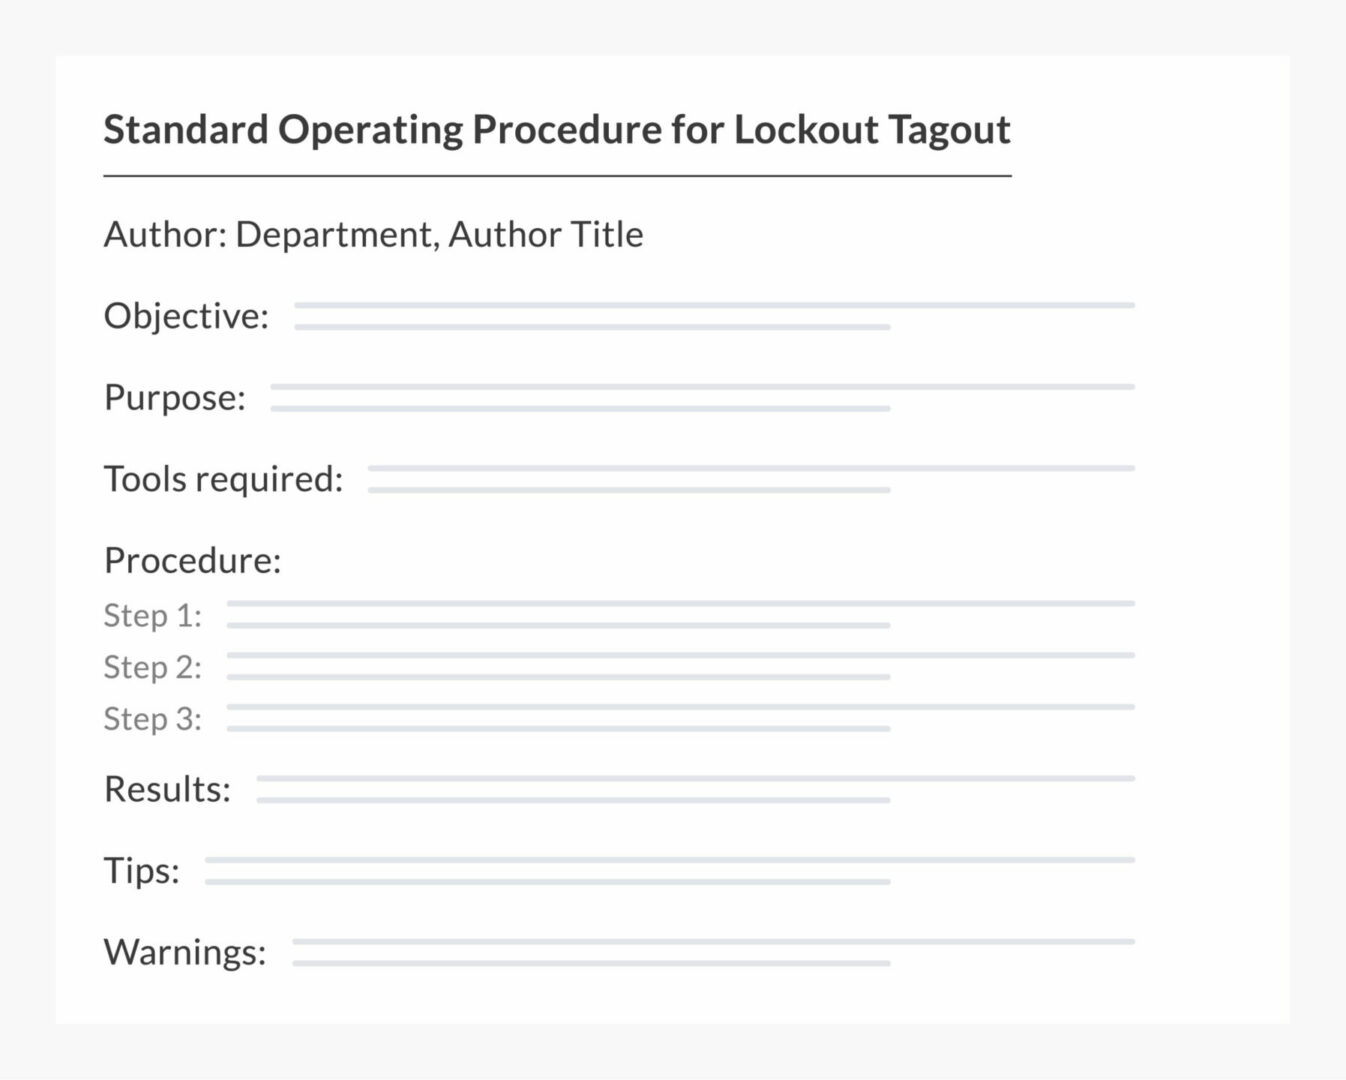 Standard operating procedure(work instructions) for lockout tagout